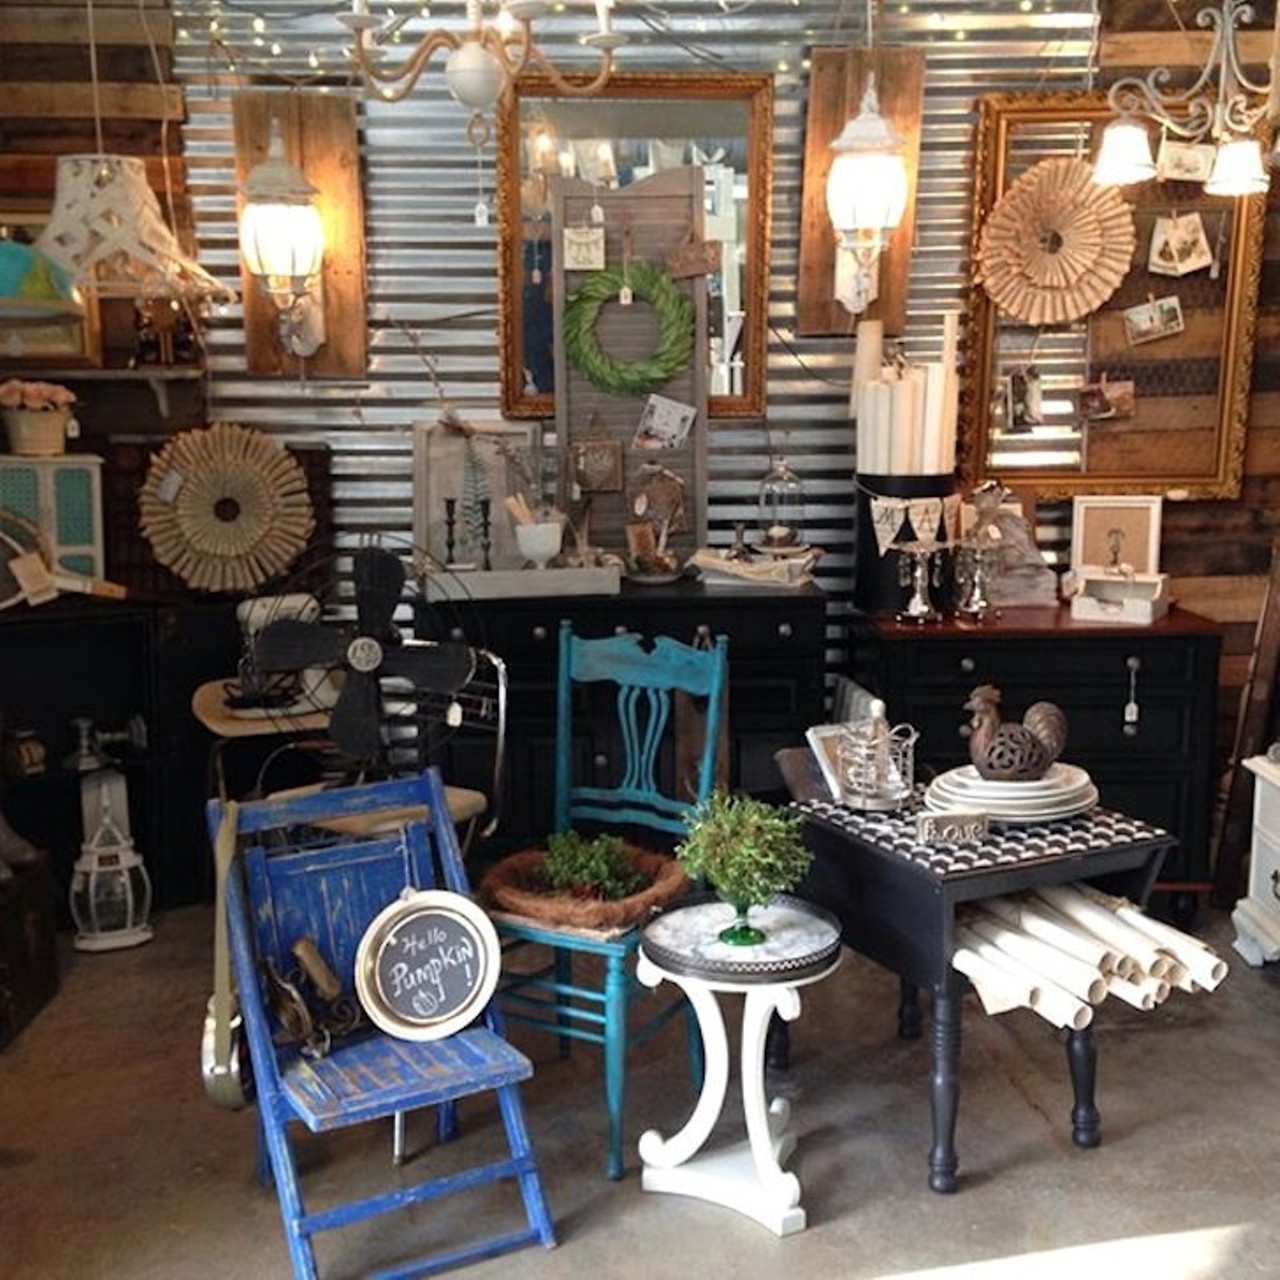 Trader Maes
2001 Rock Springs Road, Apopka | (407) 703-7869
Trader Maes is packed with over 100 unique shops where you can find the perfect historic treasure, whether you&#146;re looking for shabby chic decor or a mid-century statement piece. 
Photo via kathywitkowski/Instagram